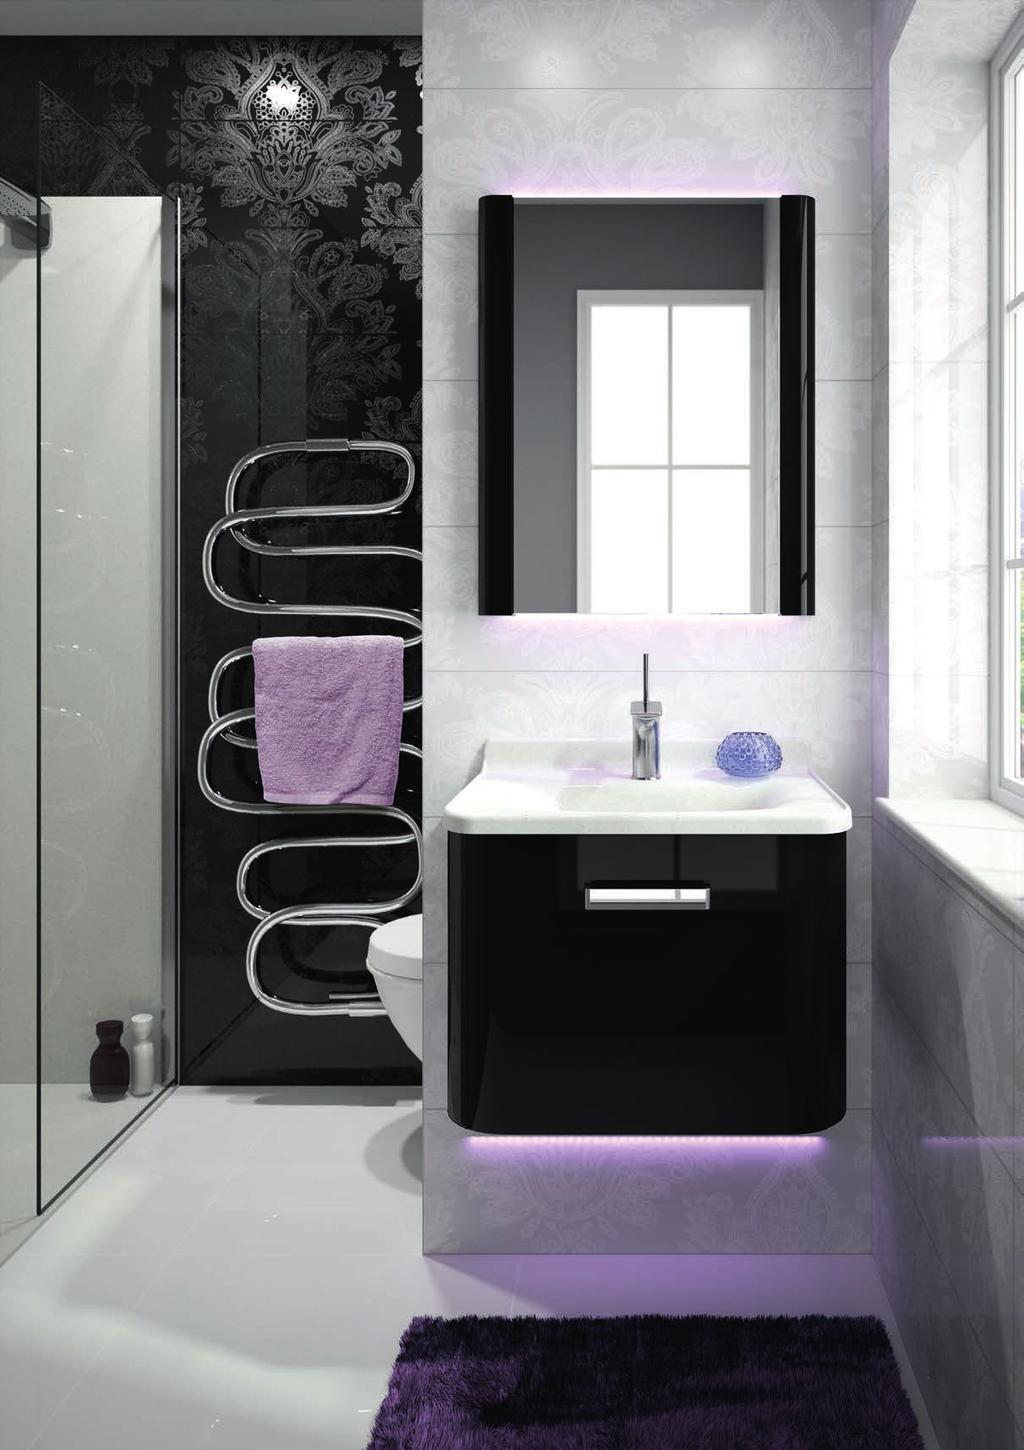 GLAMOUR Designed in collaboration with Mathilde Bretillot GLAMOUR11 basin unit F50 Gloss Black, SMO234 Blizzard Galaxy Gloss basin with upstand,